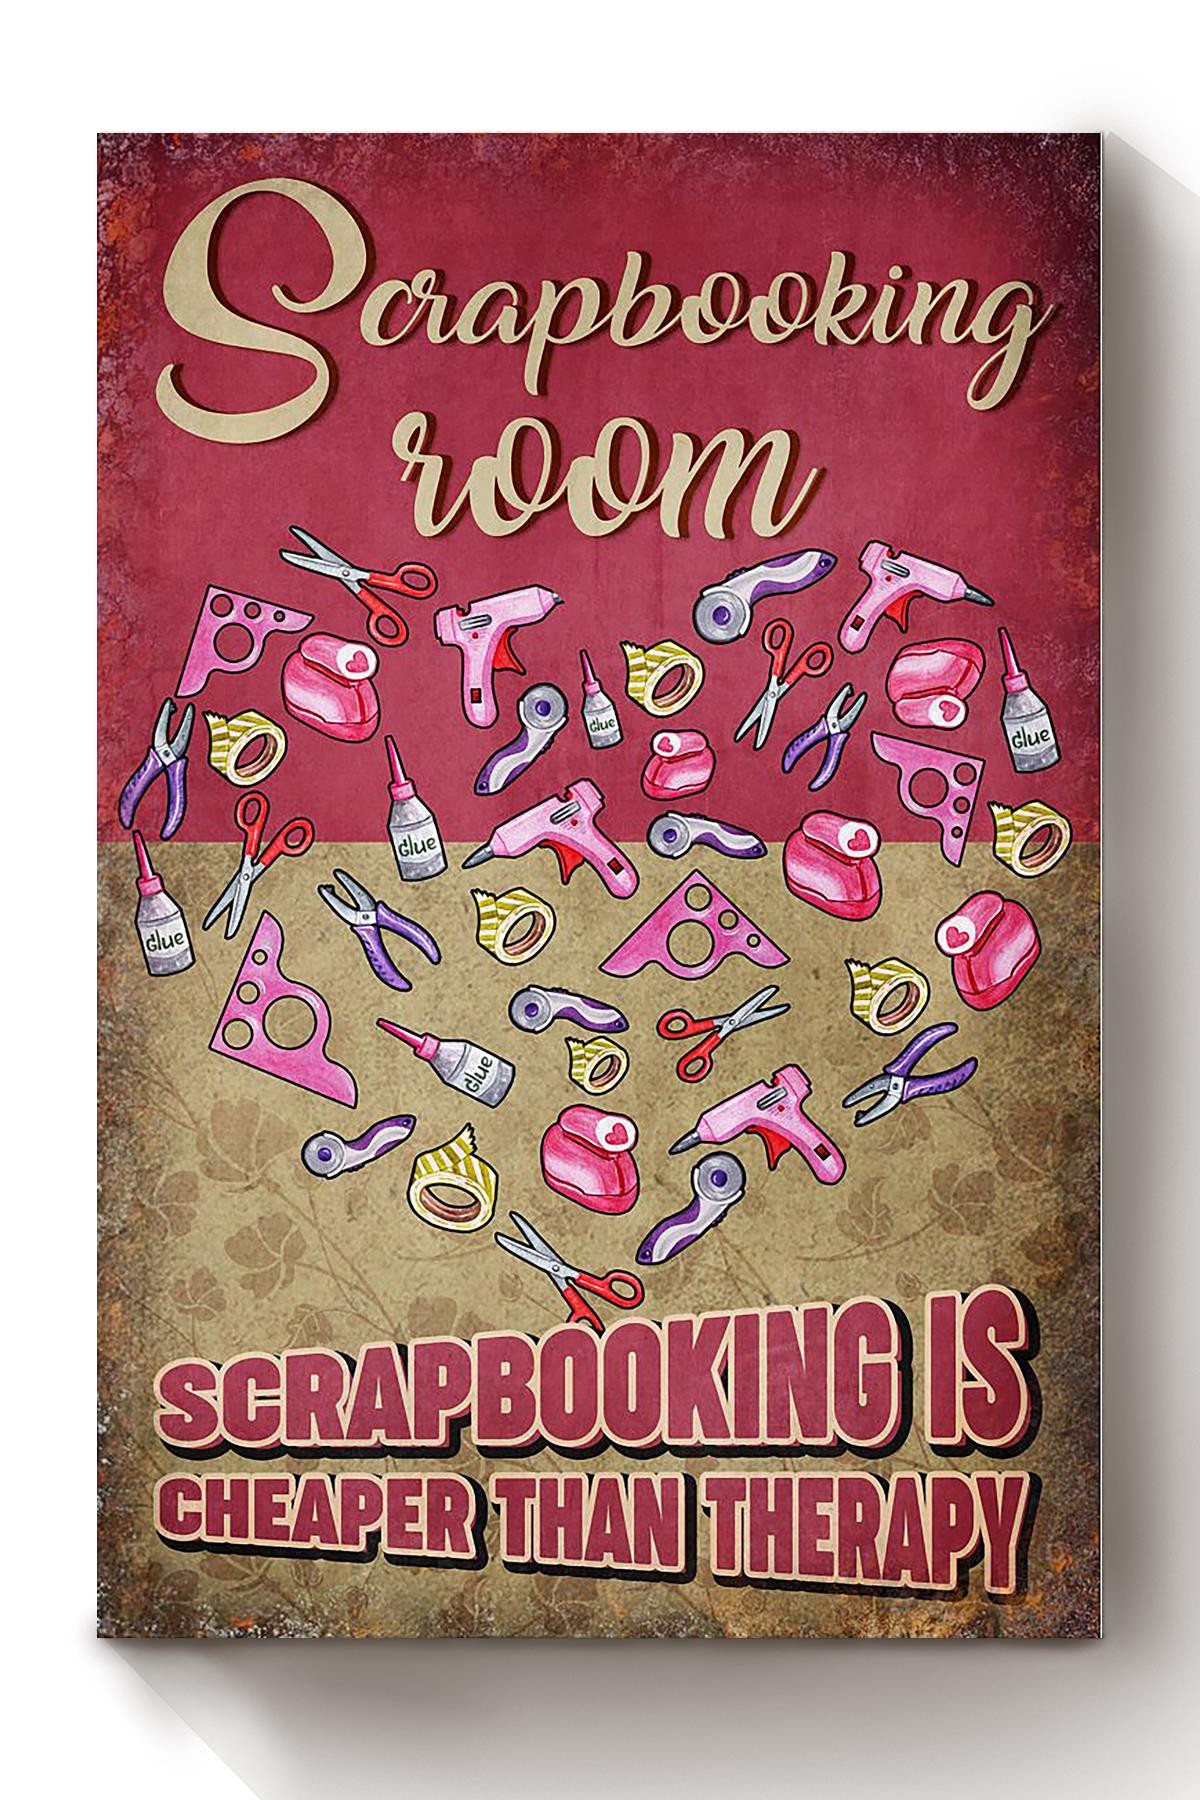 Scrapbooking Is Cheaper Than Therapy Funny Diy Quote For Housewarming Canvas Wrapped Canvas 8x10